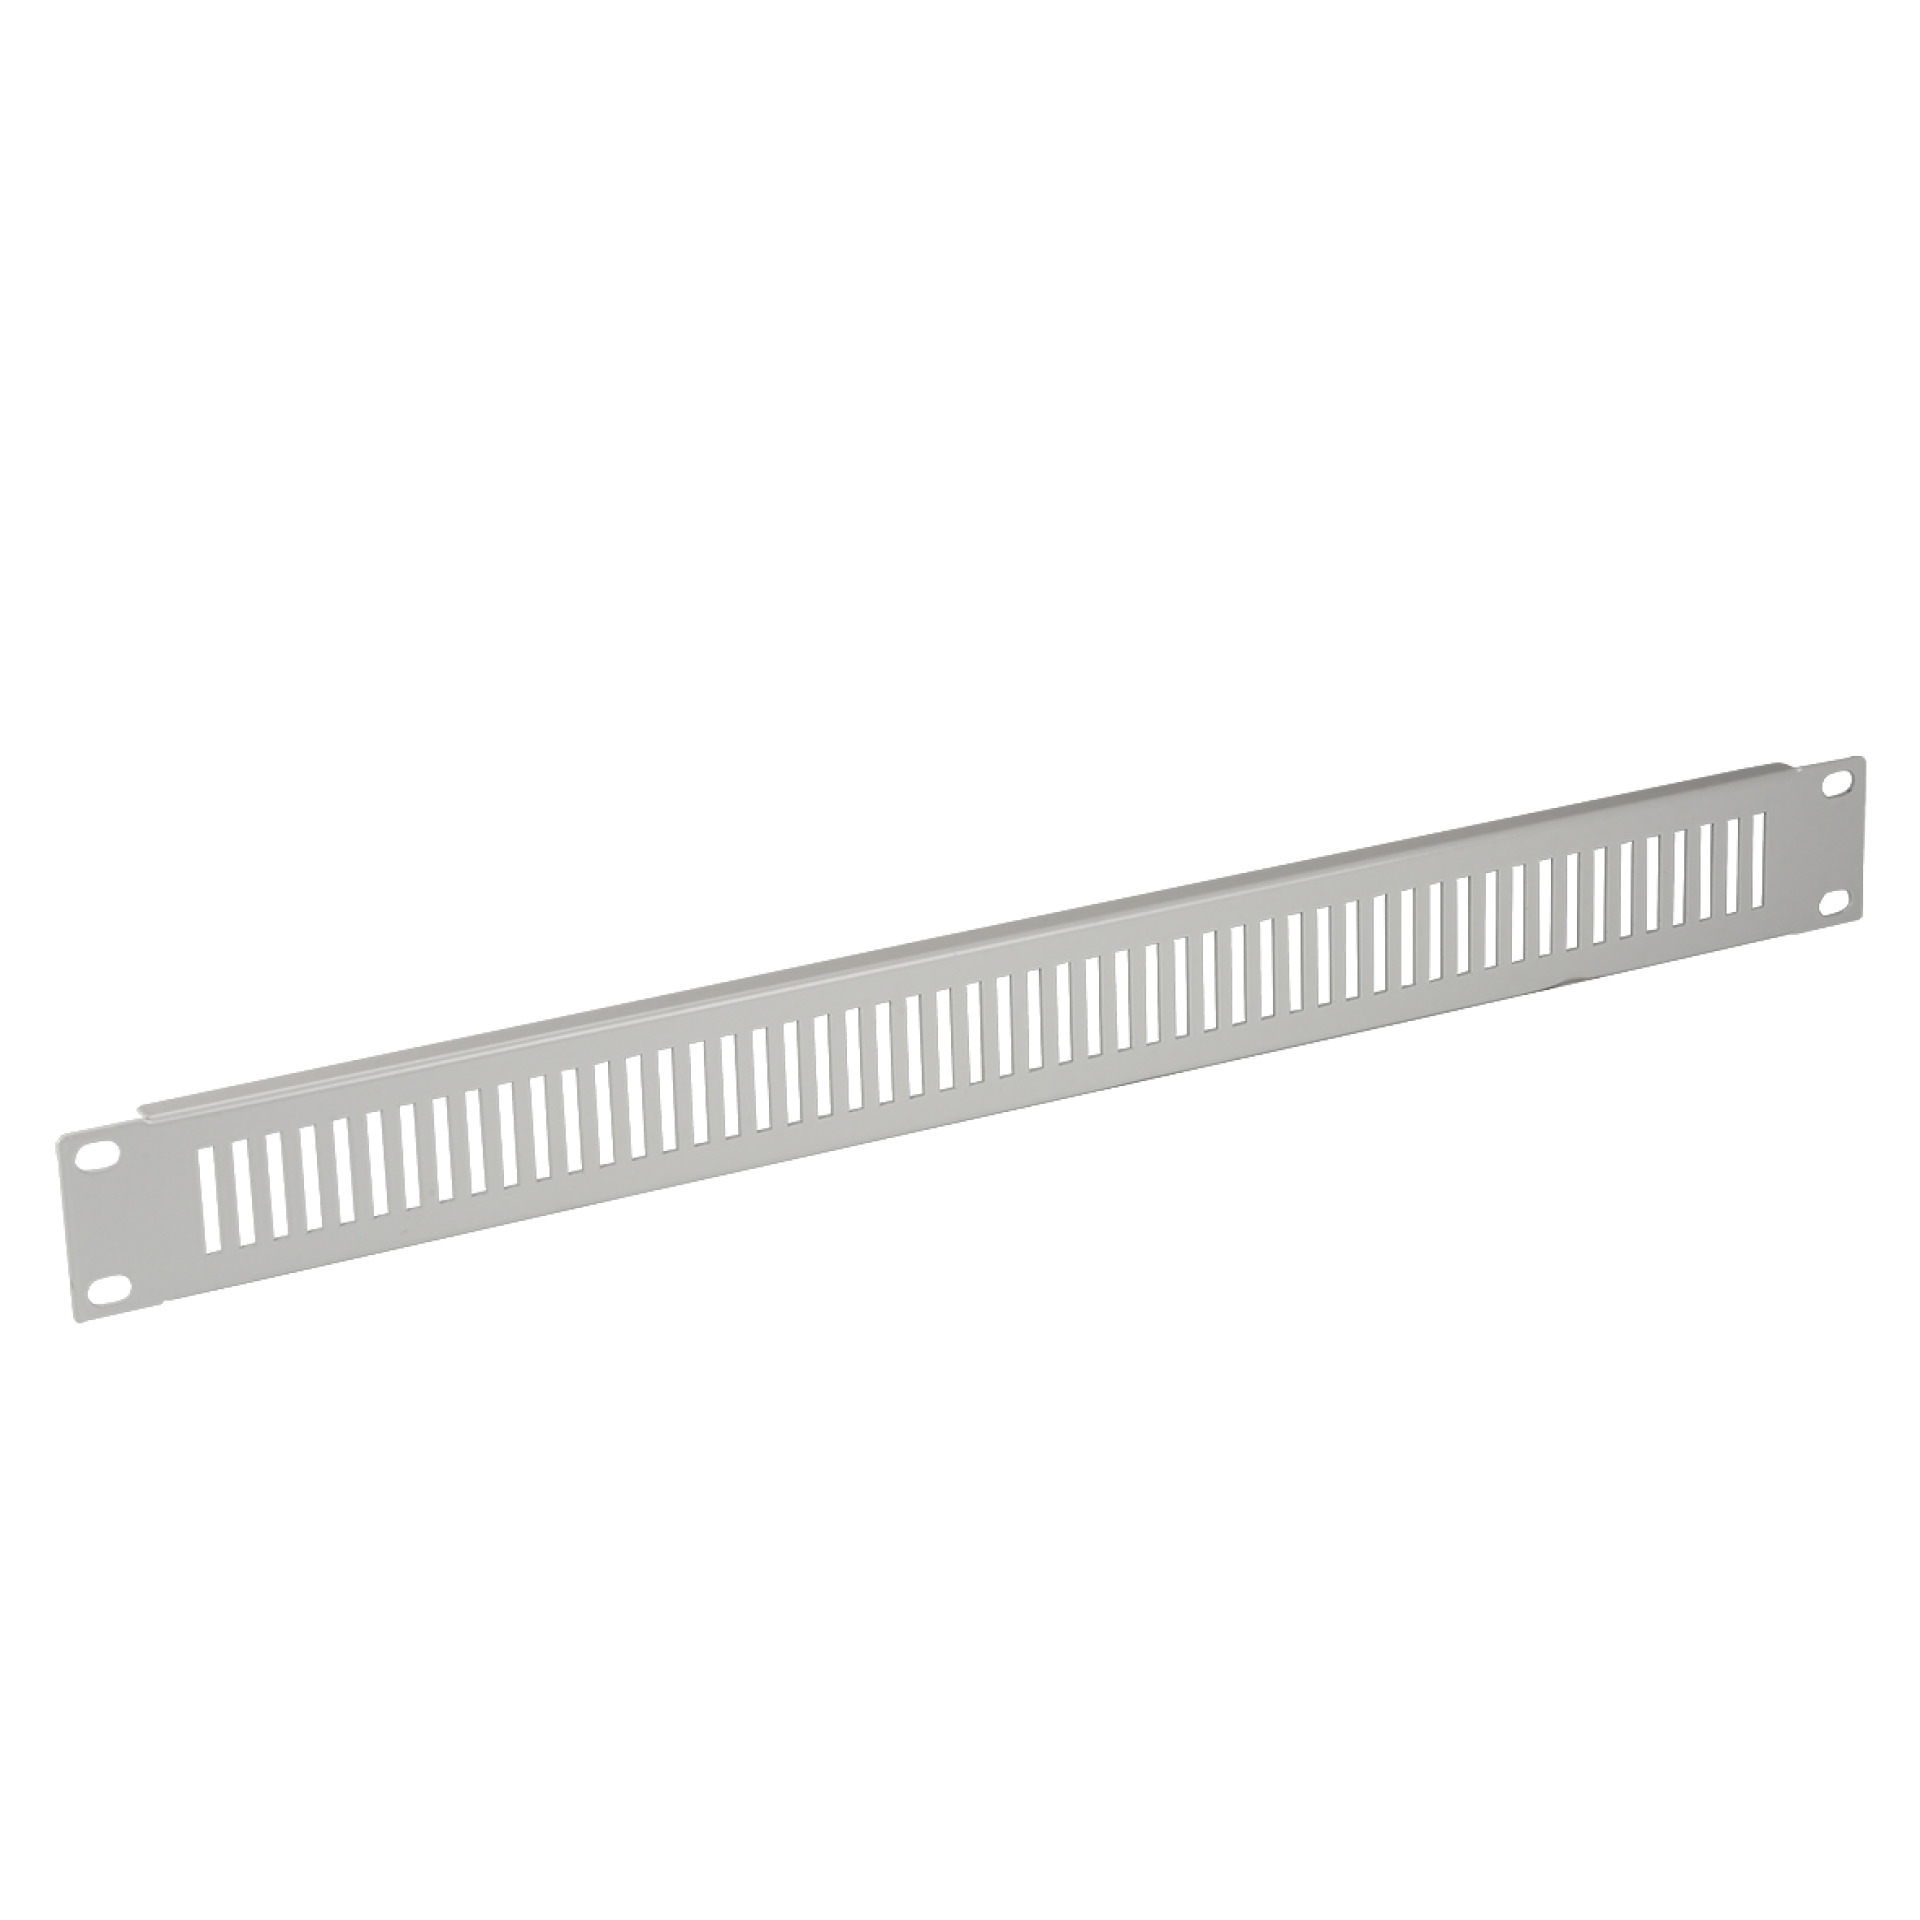 19" 1U Dummy Plate, Perforated, RAL9005